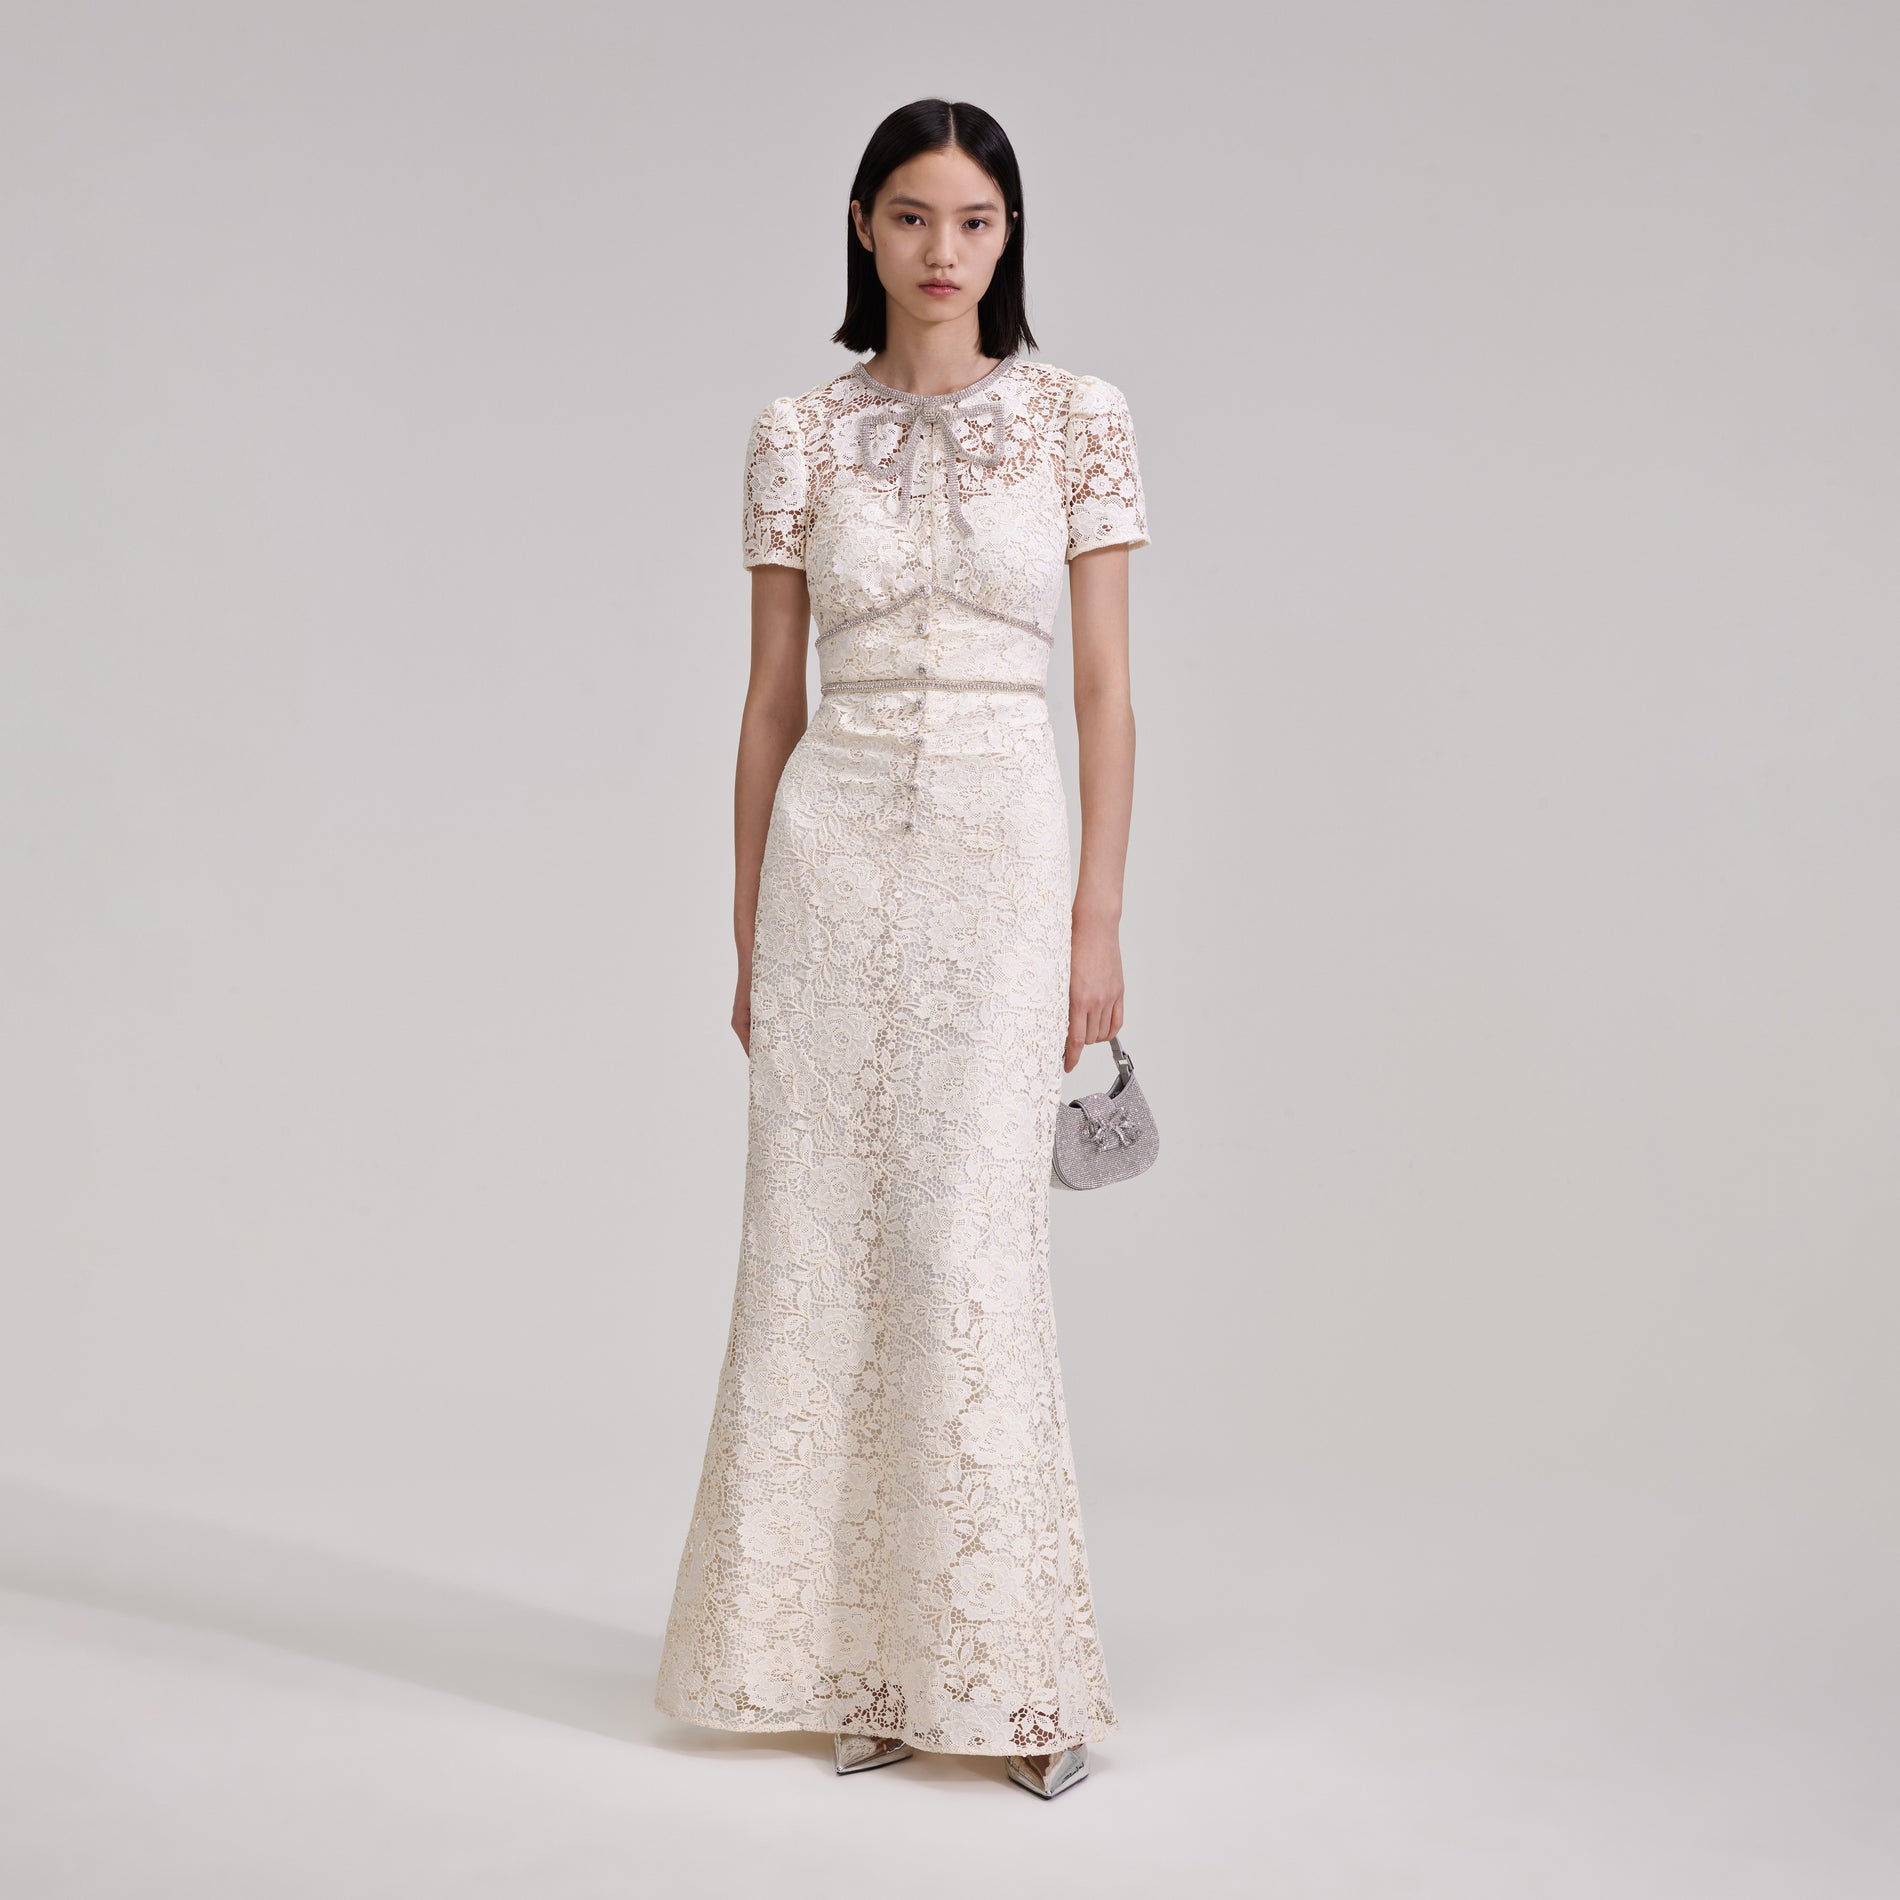 A woman wearing the Cream Cord Lace Bow Maxi Dress